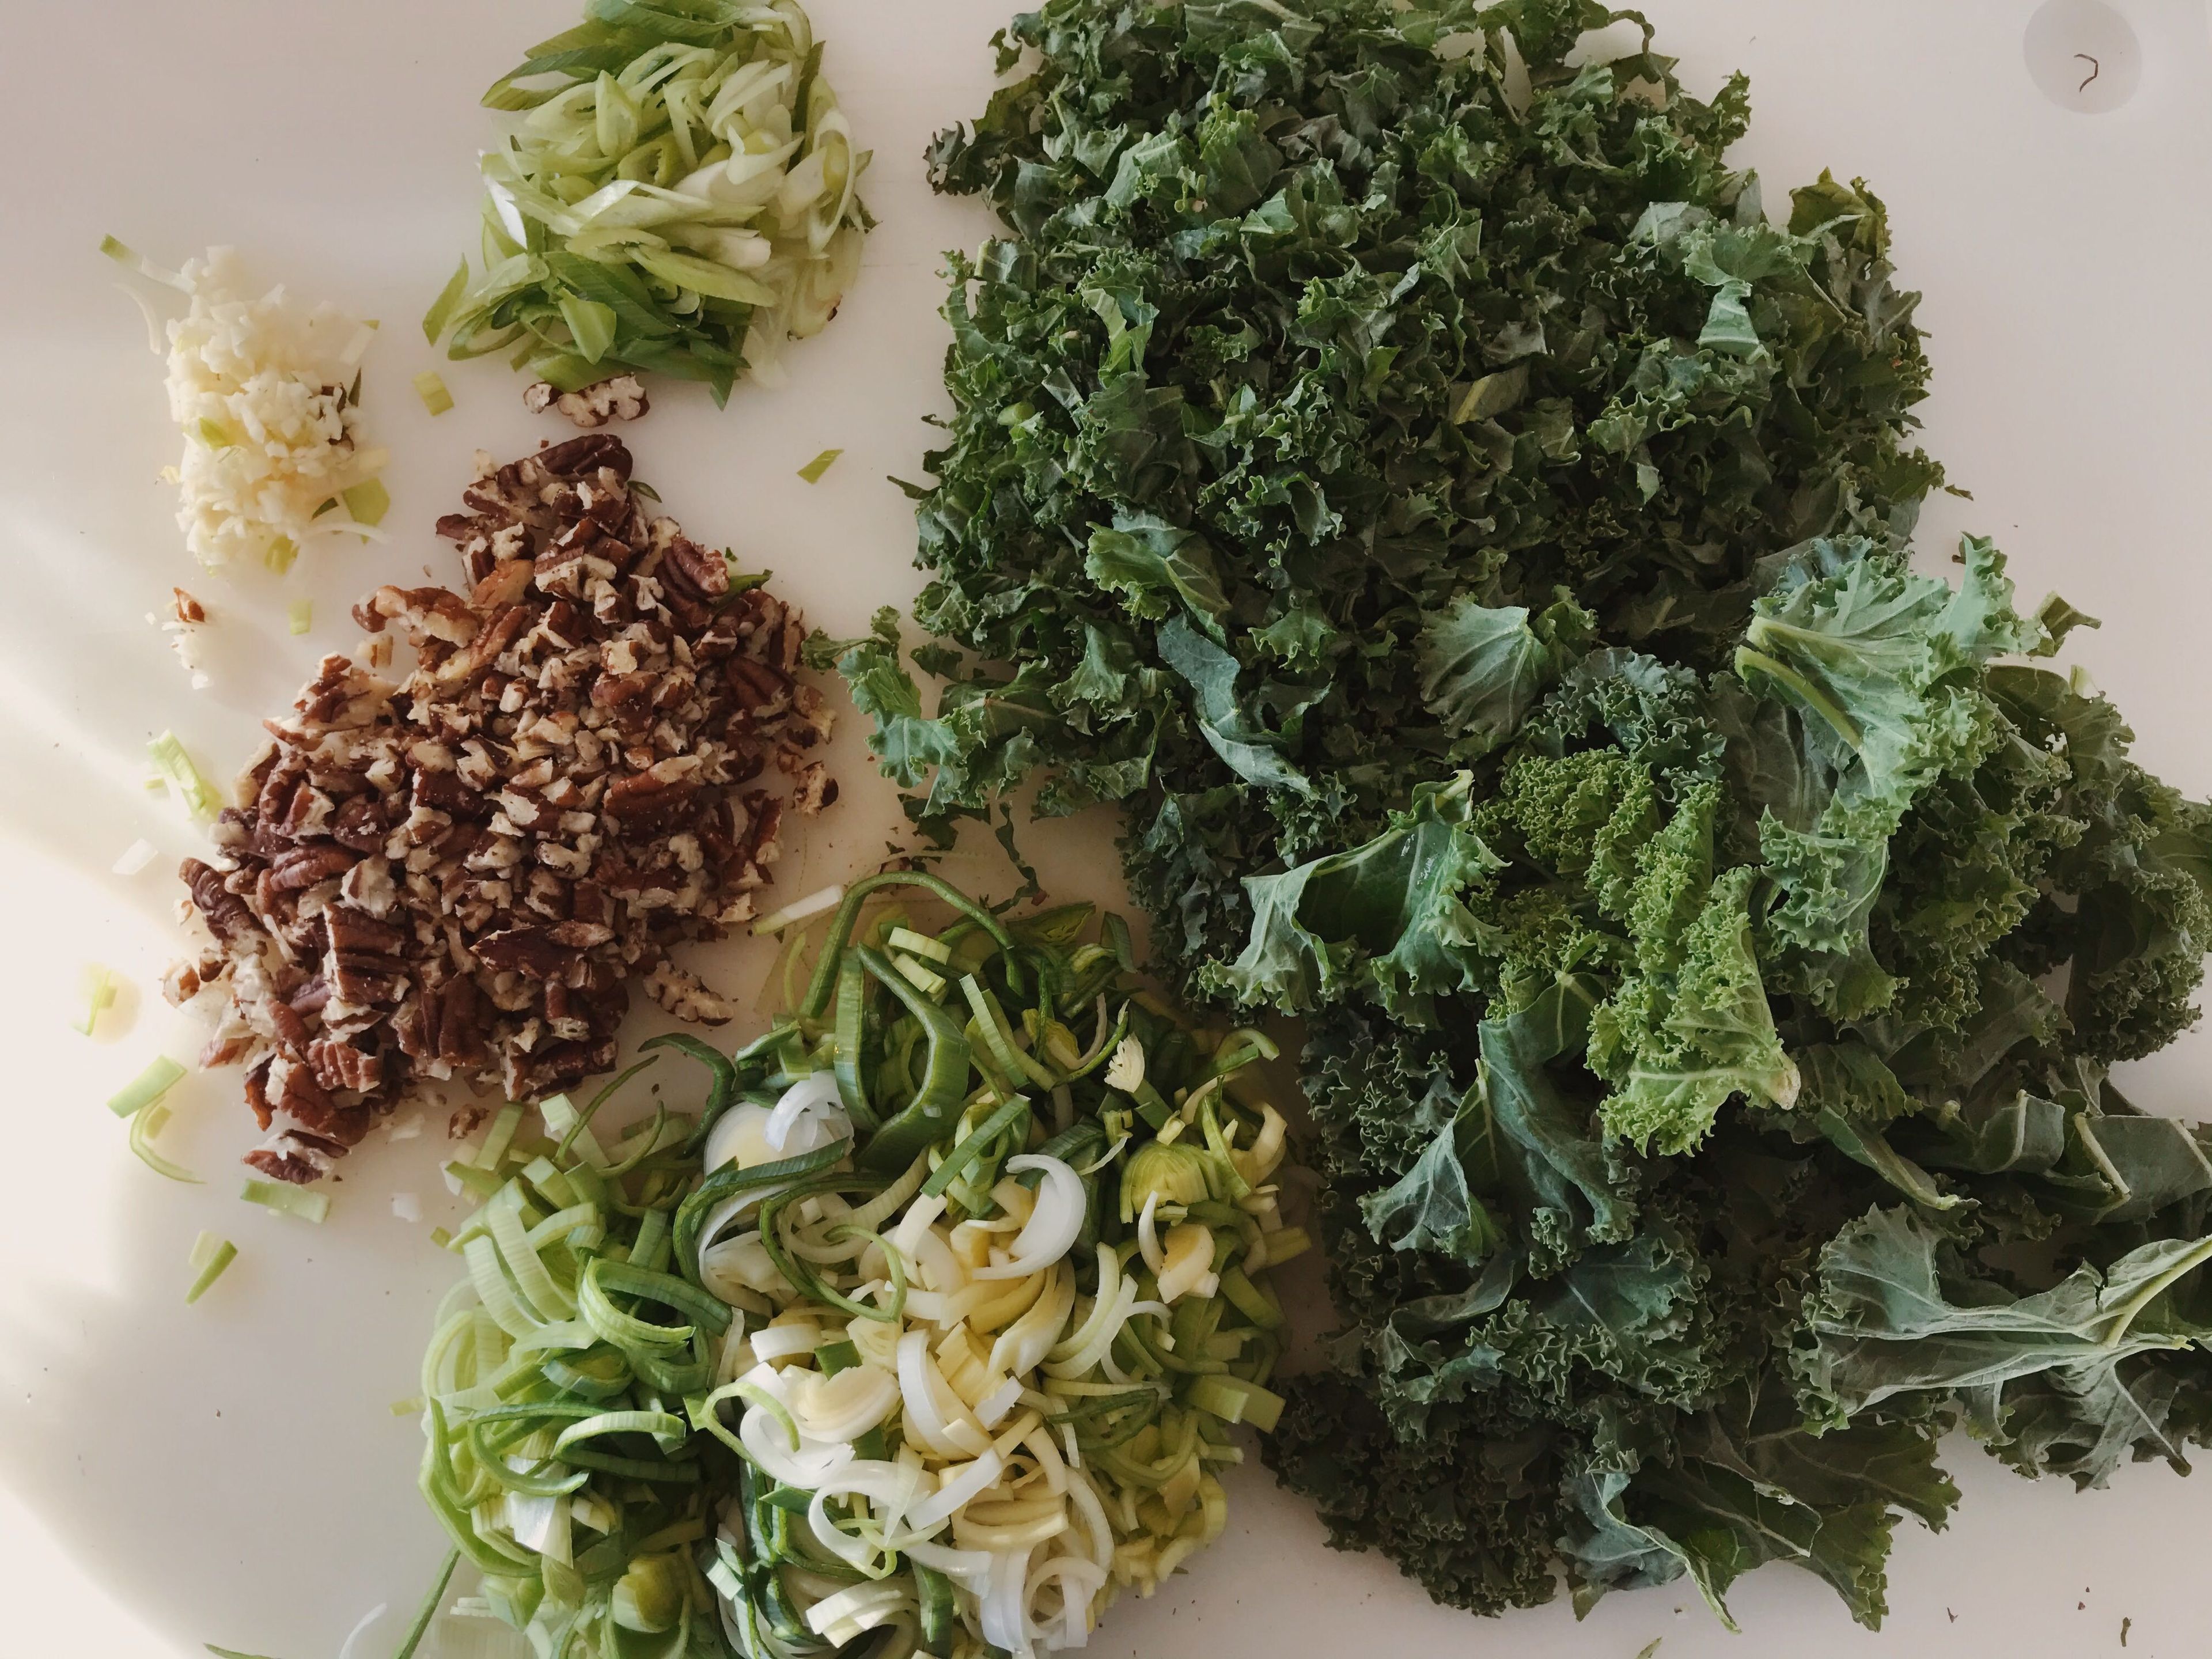 Pluck the kale leaves from the stems and cut into small pieces. Slice the leeks, finely chop the garlic and cut the spring onion into fine rings. Toast the pecans in a pan without fat and then chop them.